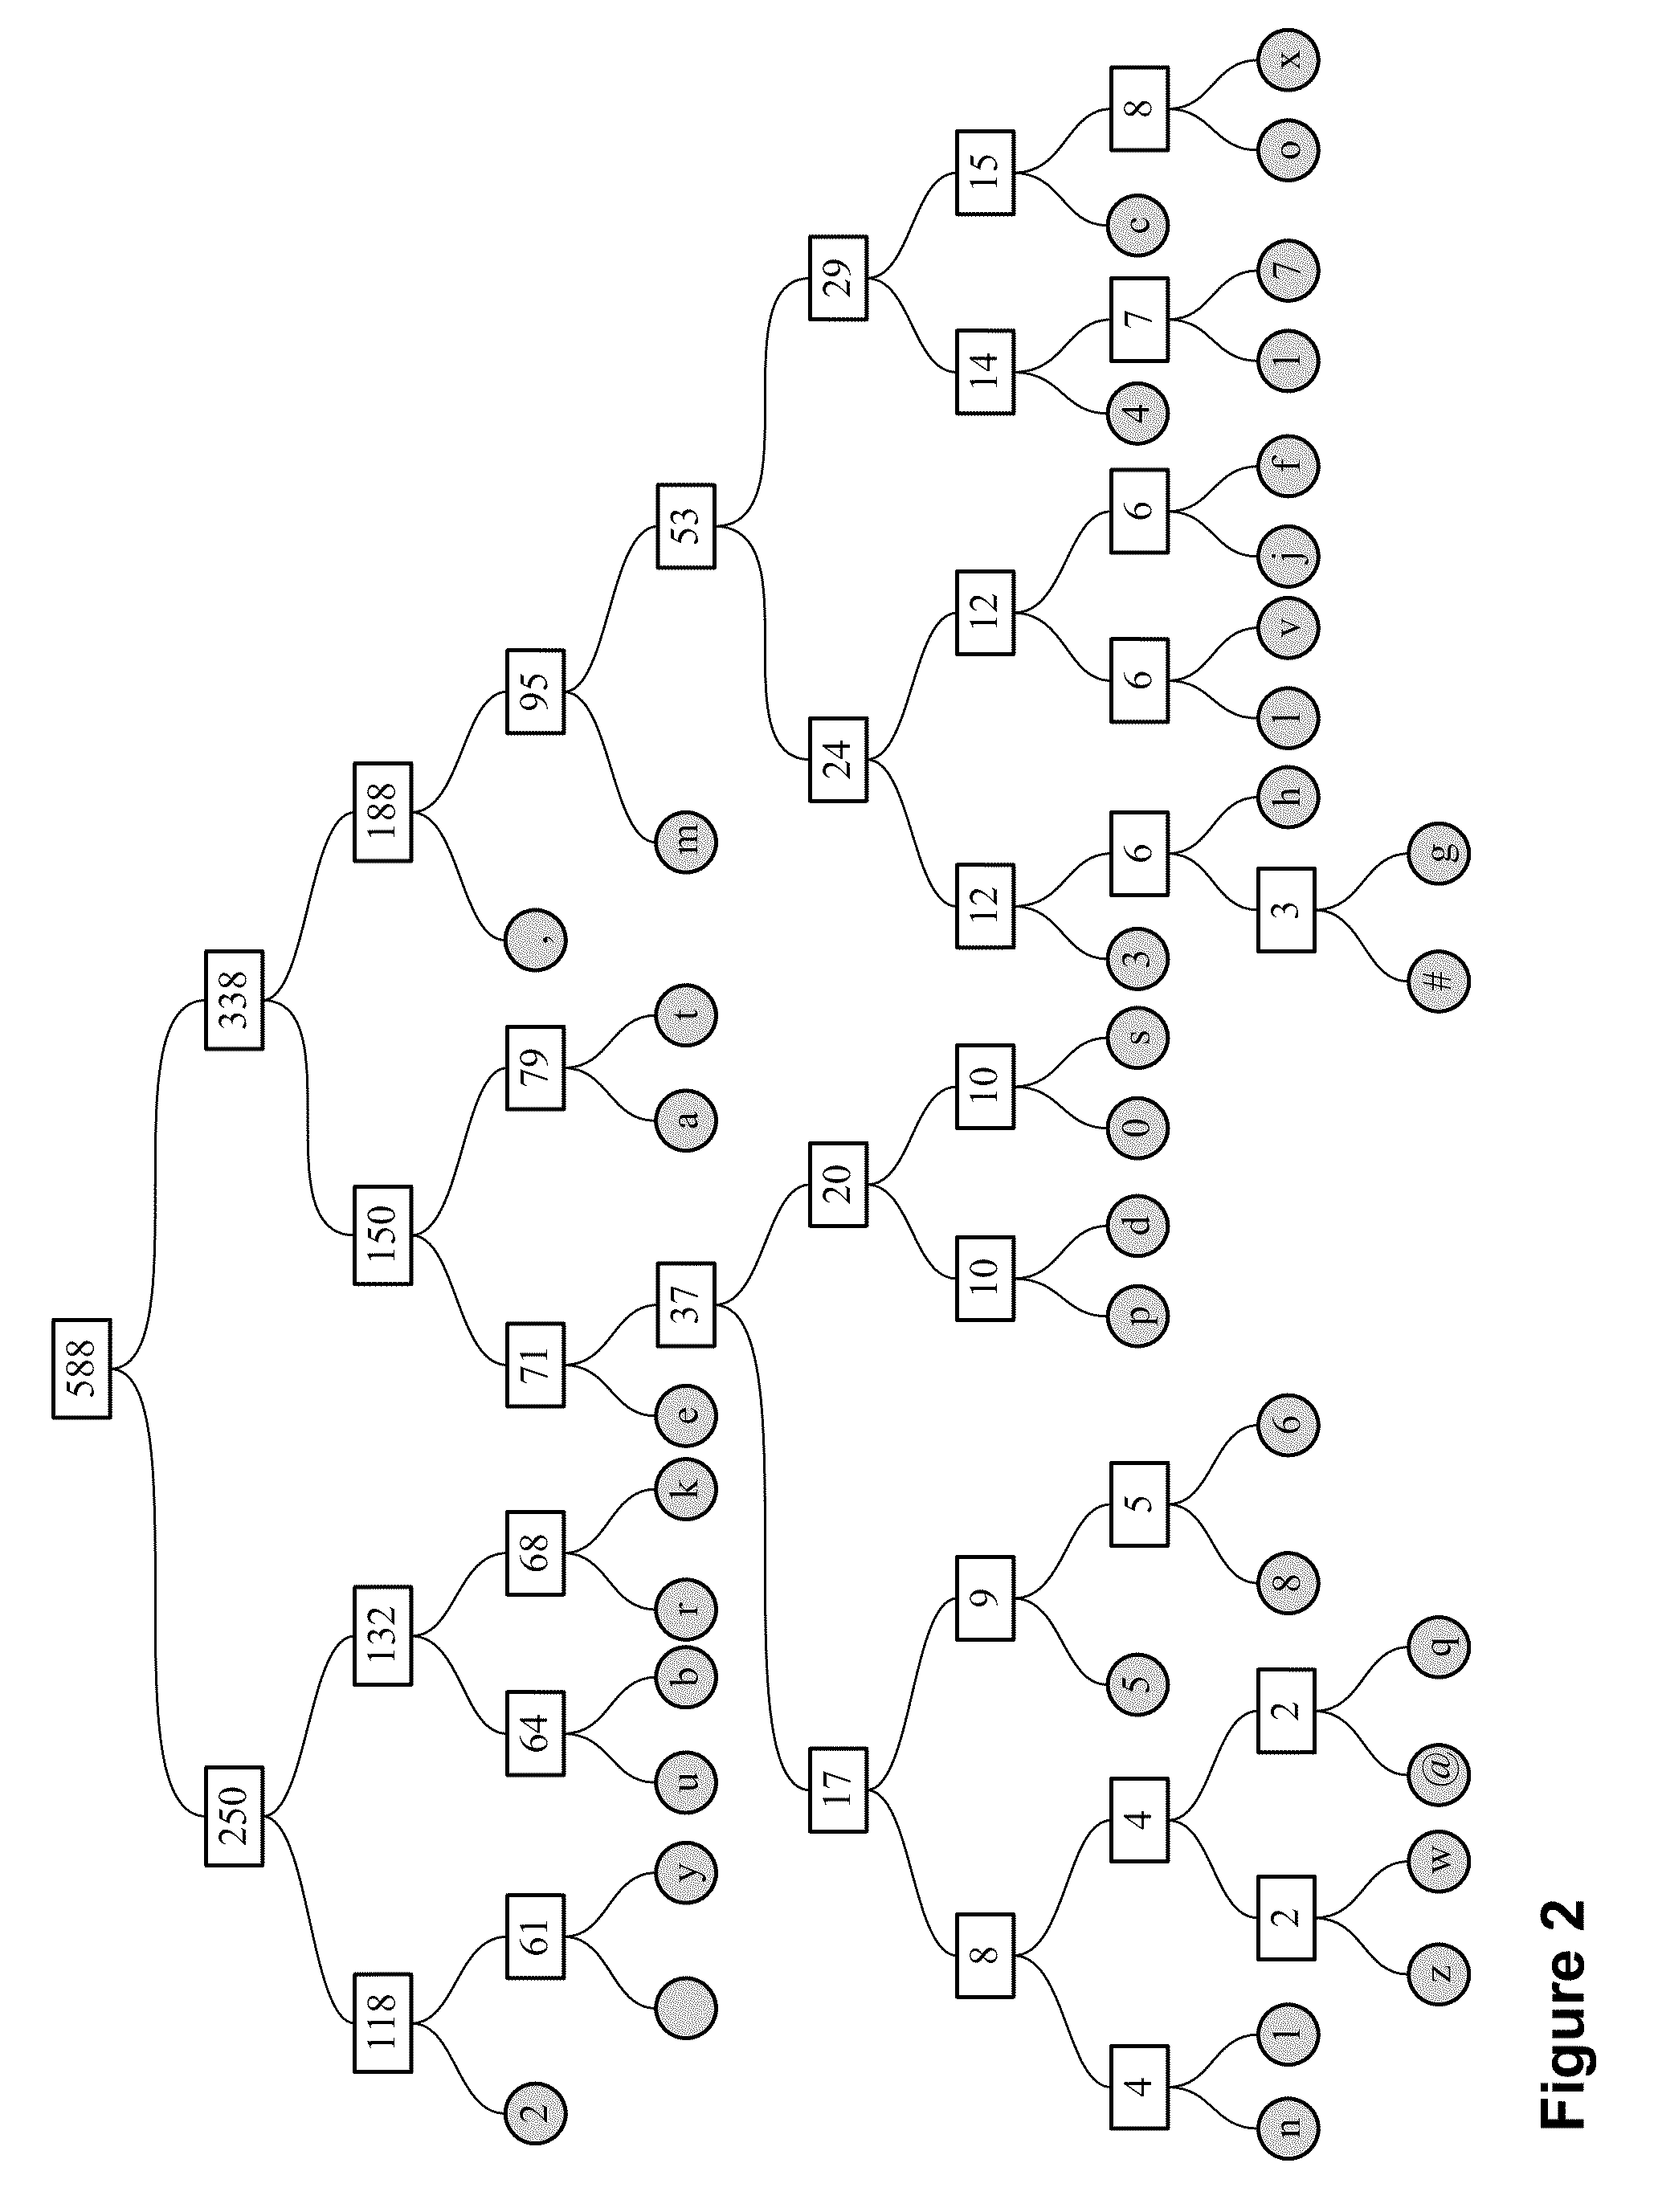 Method and System For Enhancing The Efficiency Of A Digitally Communicated Data Exchange